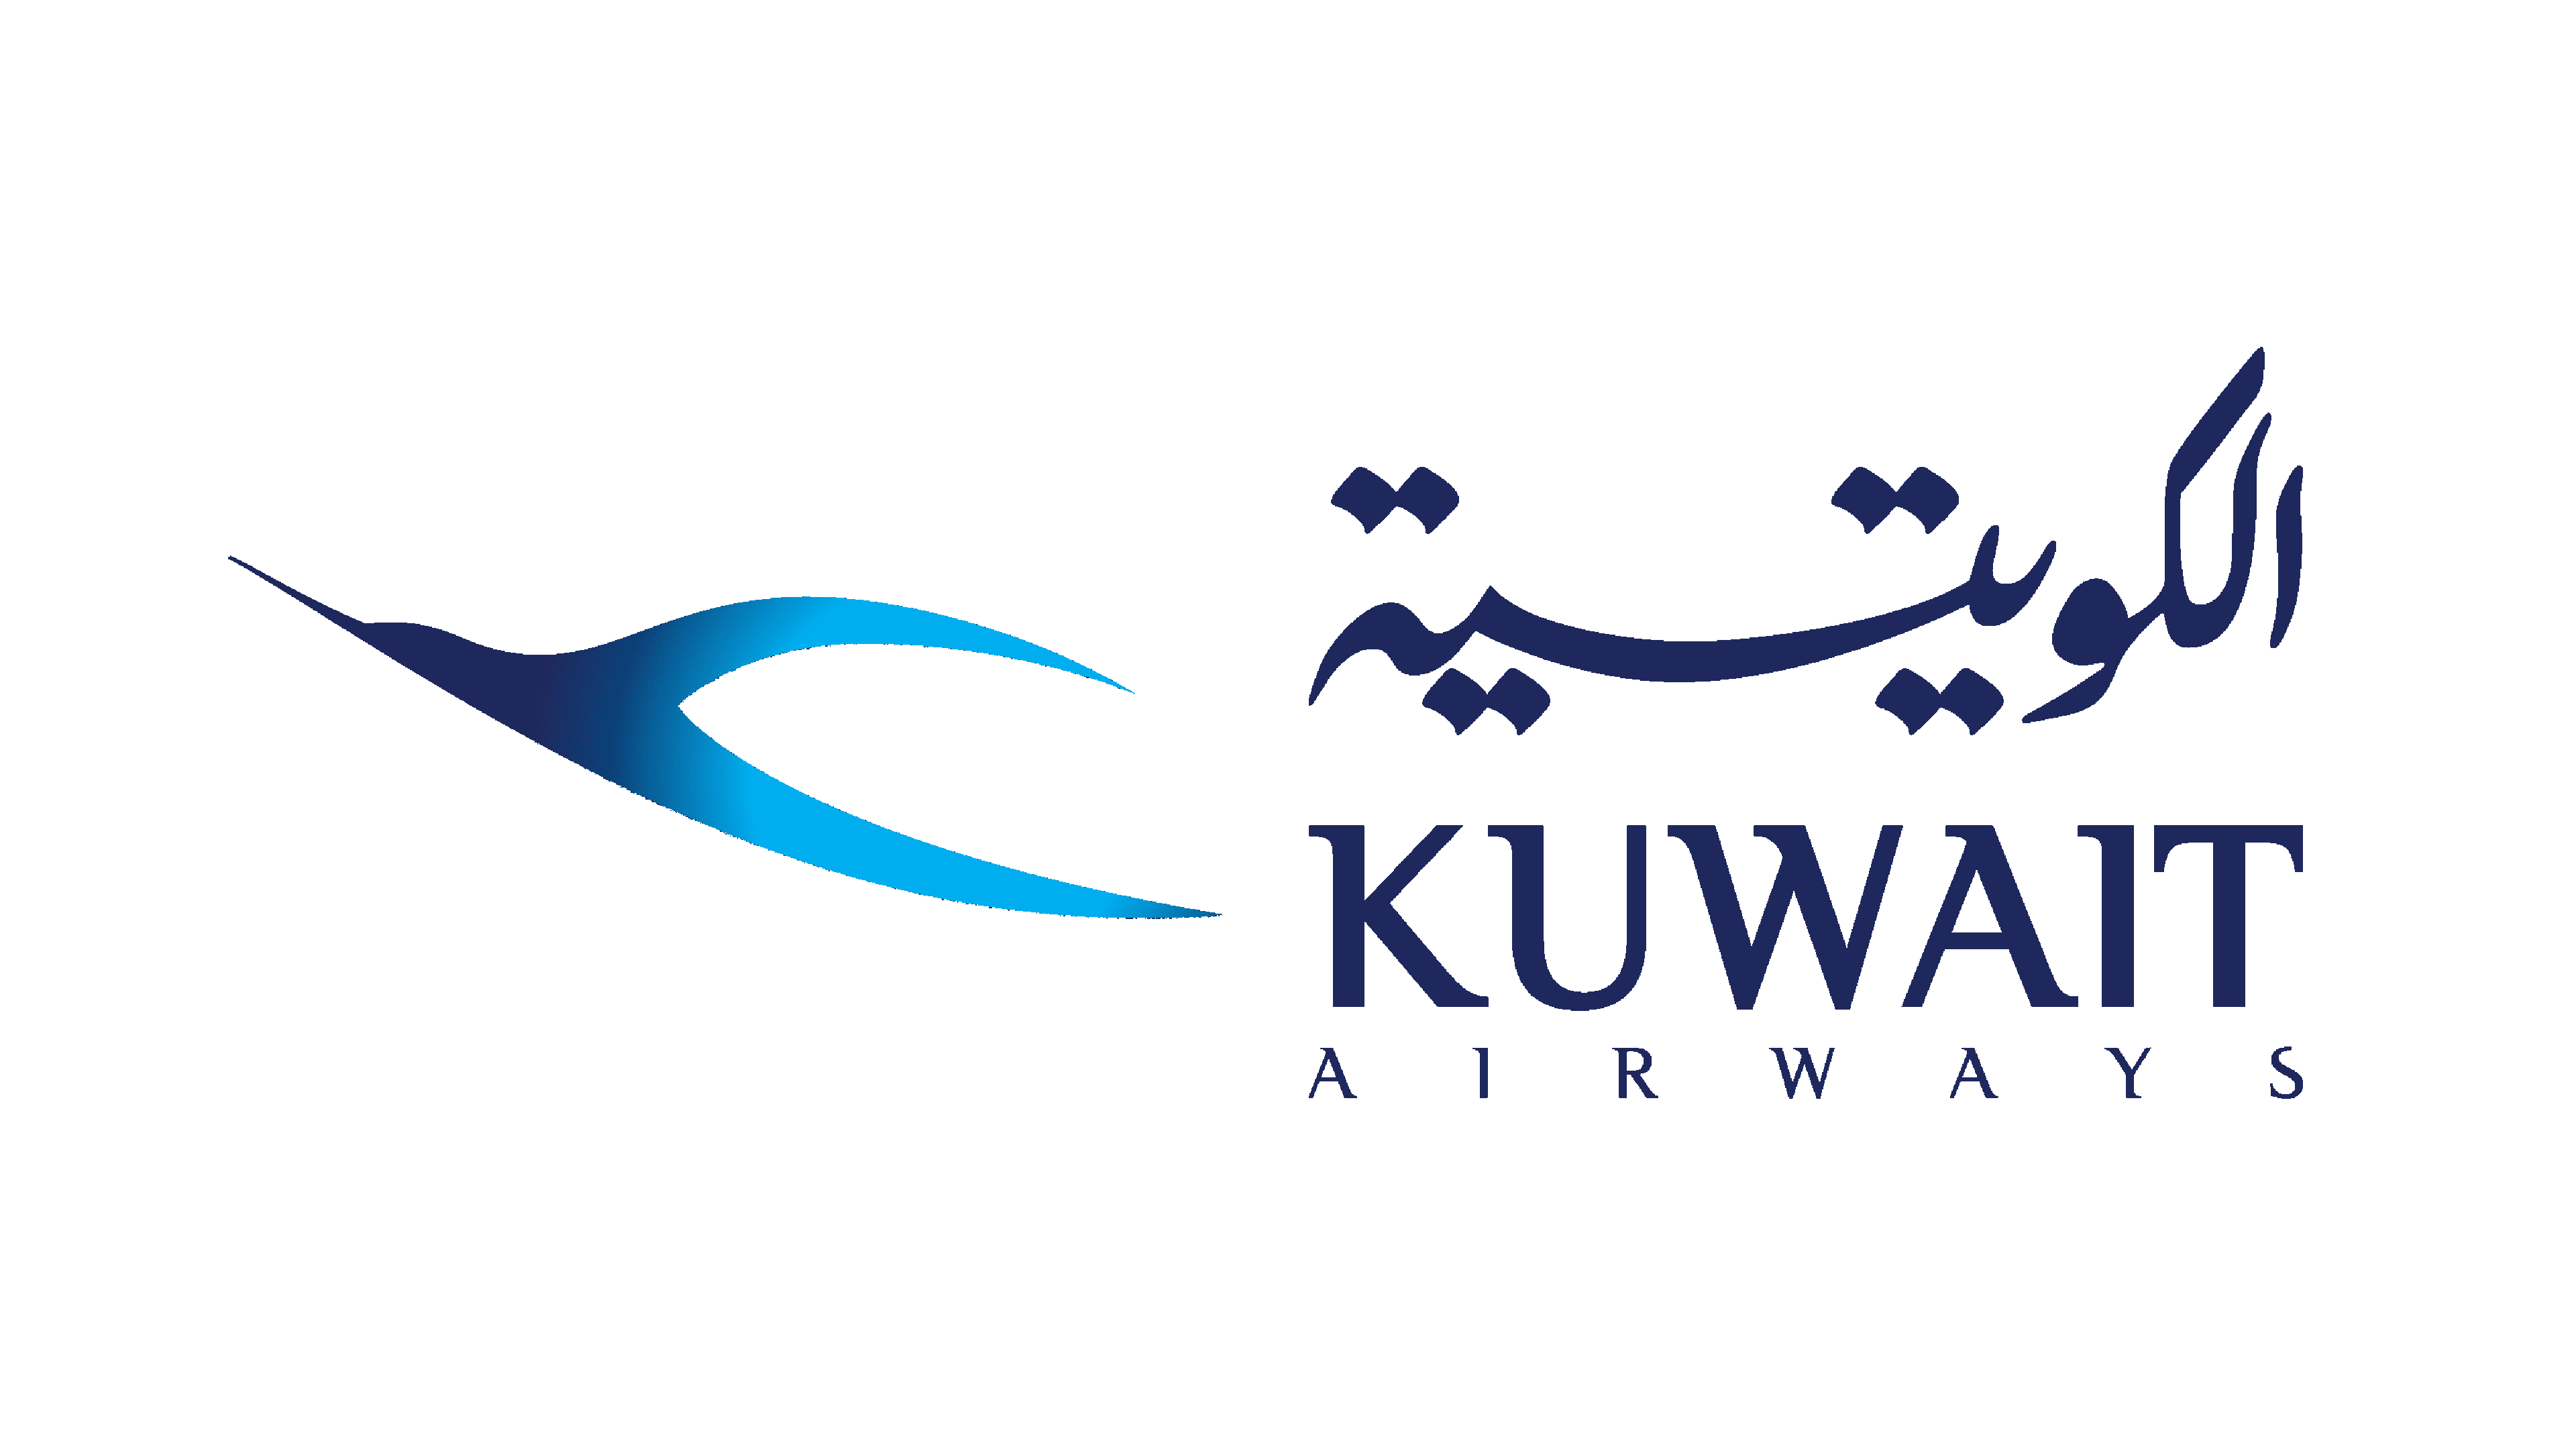 Kuwait Airways Logo Evolution History And Meaning